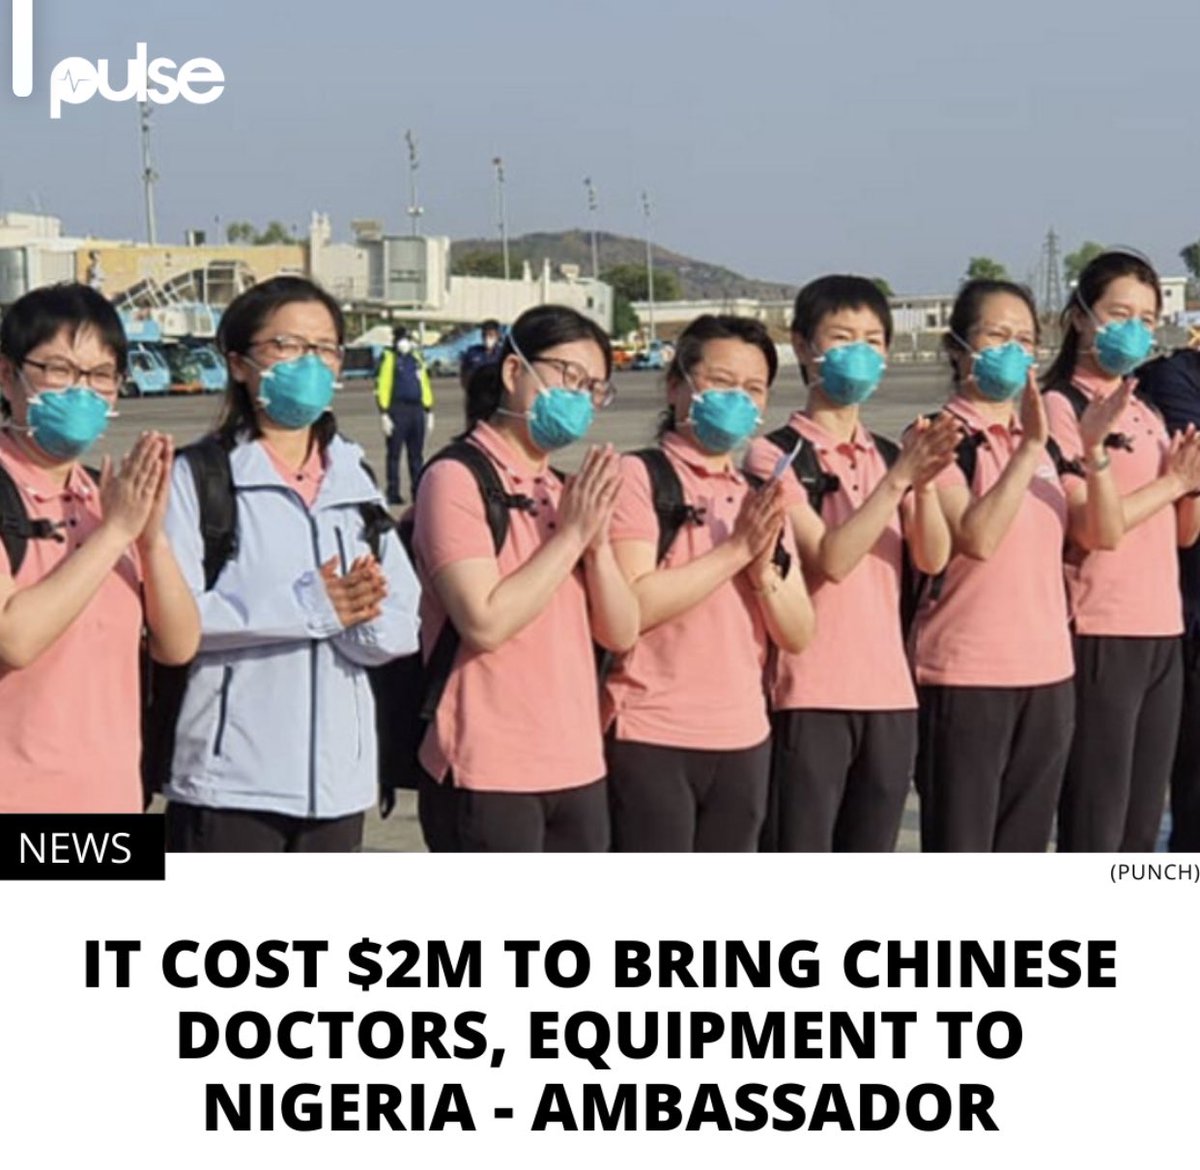 It is official. We don’t have a Govt worthy of being called one. In their rabid bid to loot at the expense of an impoverished people besieged by the pandemic they went along to import ChineseDoctors while Nigerians are being humiliated in China. Our Govt is worse than a plague!